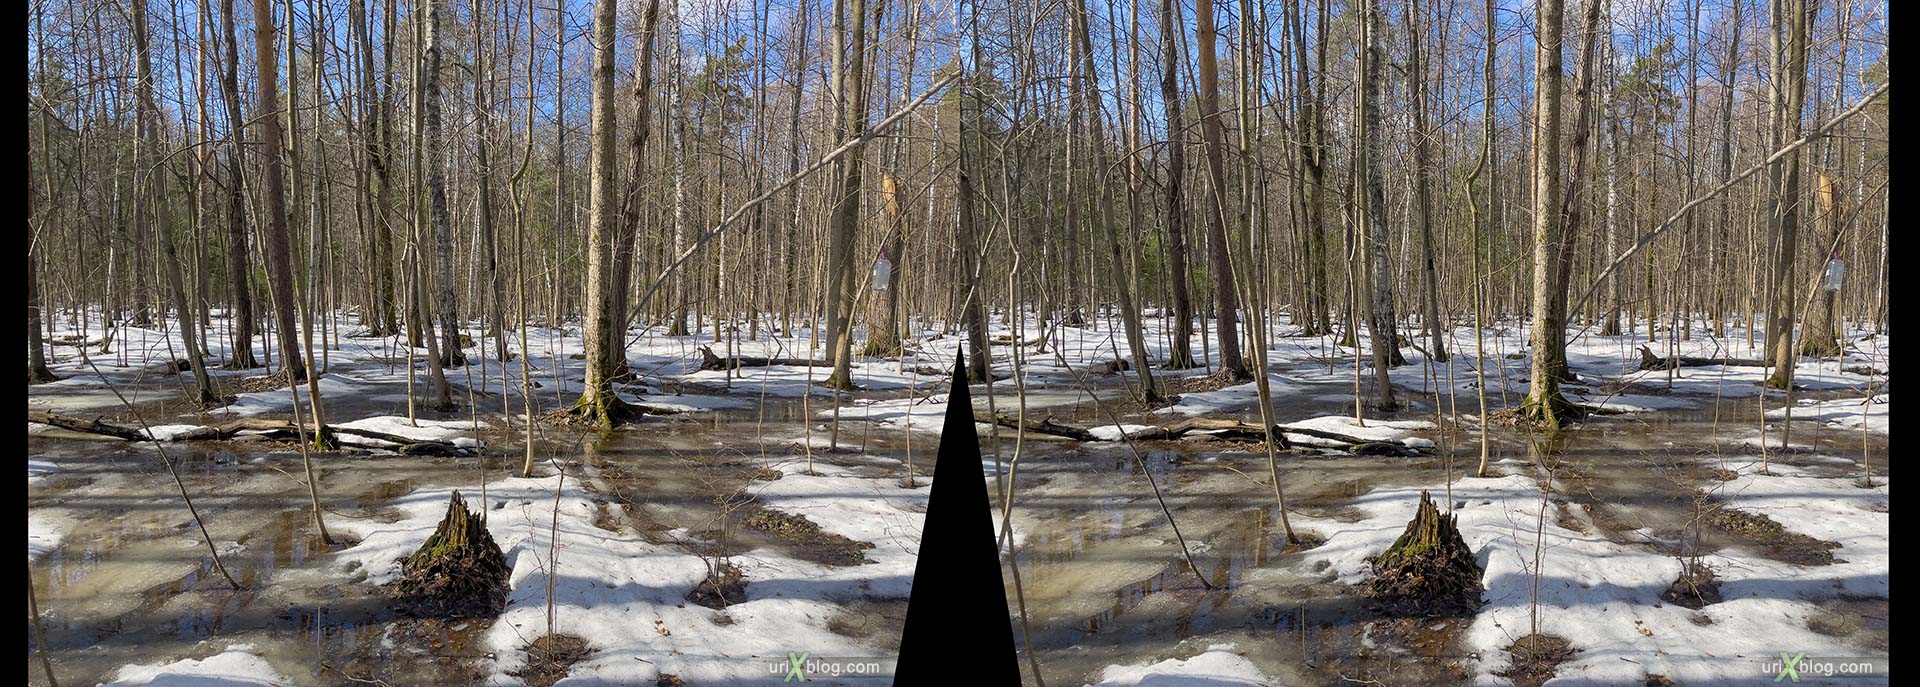 Timiryazevsky forest, park, forest, trees, snow, puddles, spring, winter, april, Moscow, Russia, 3D, stereo pair, cross-eyed, crossview, cross view stereo pair, stereoscopic